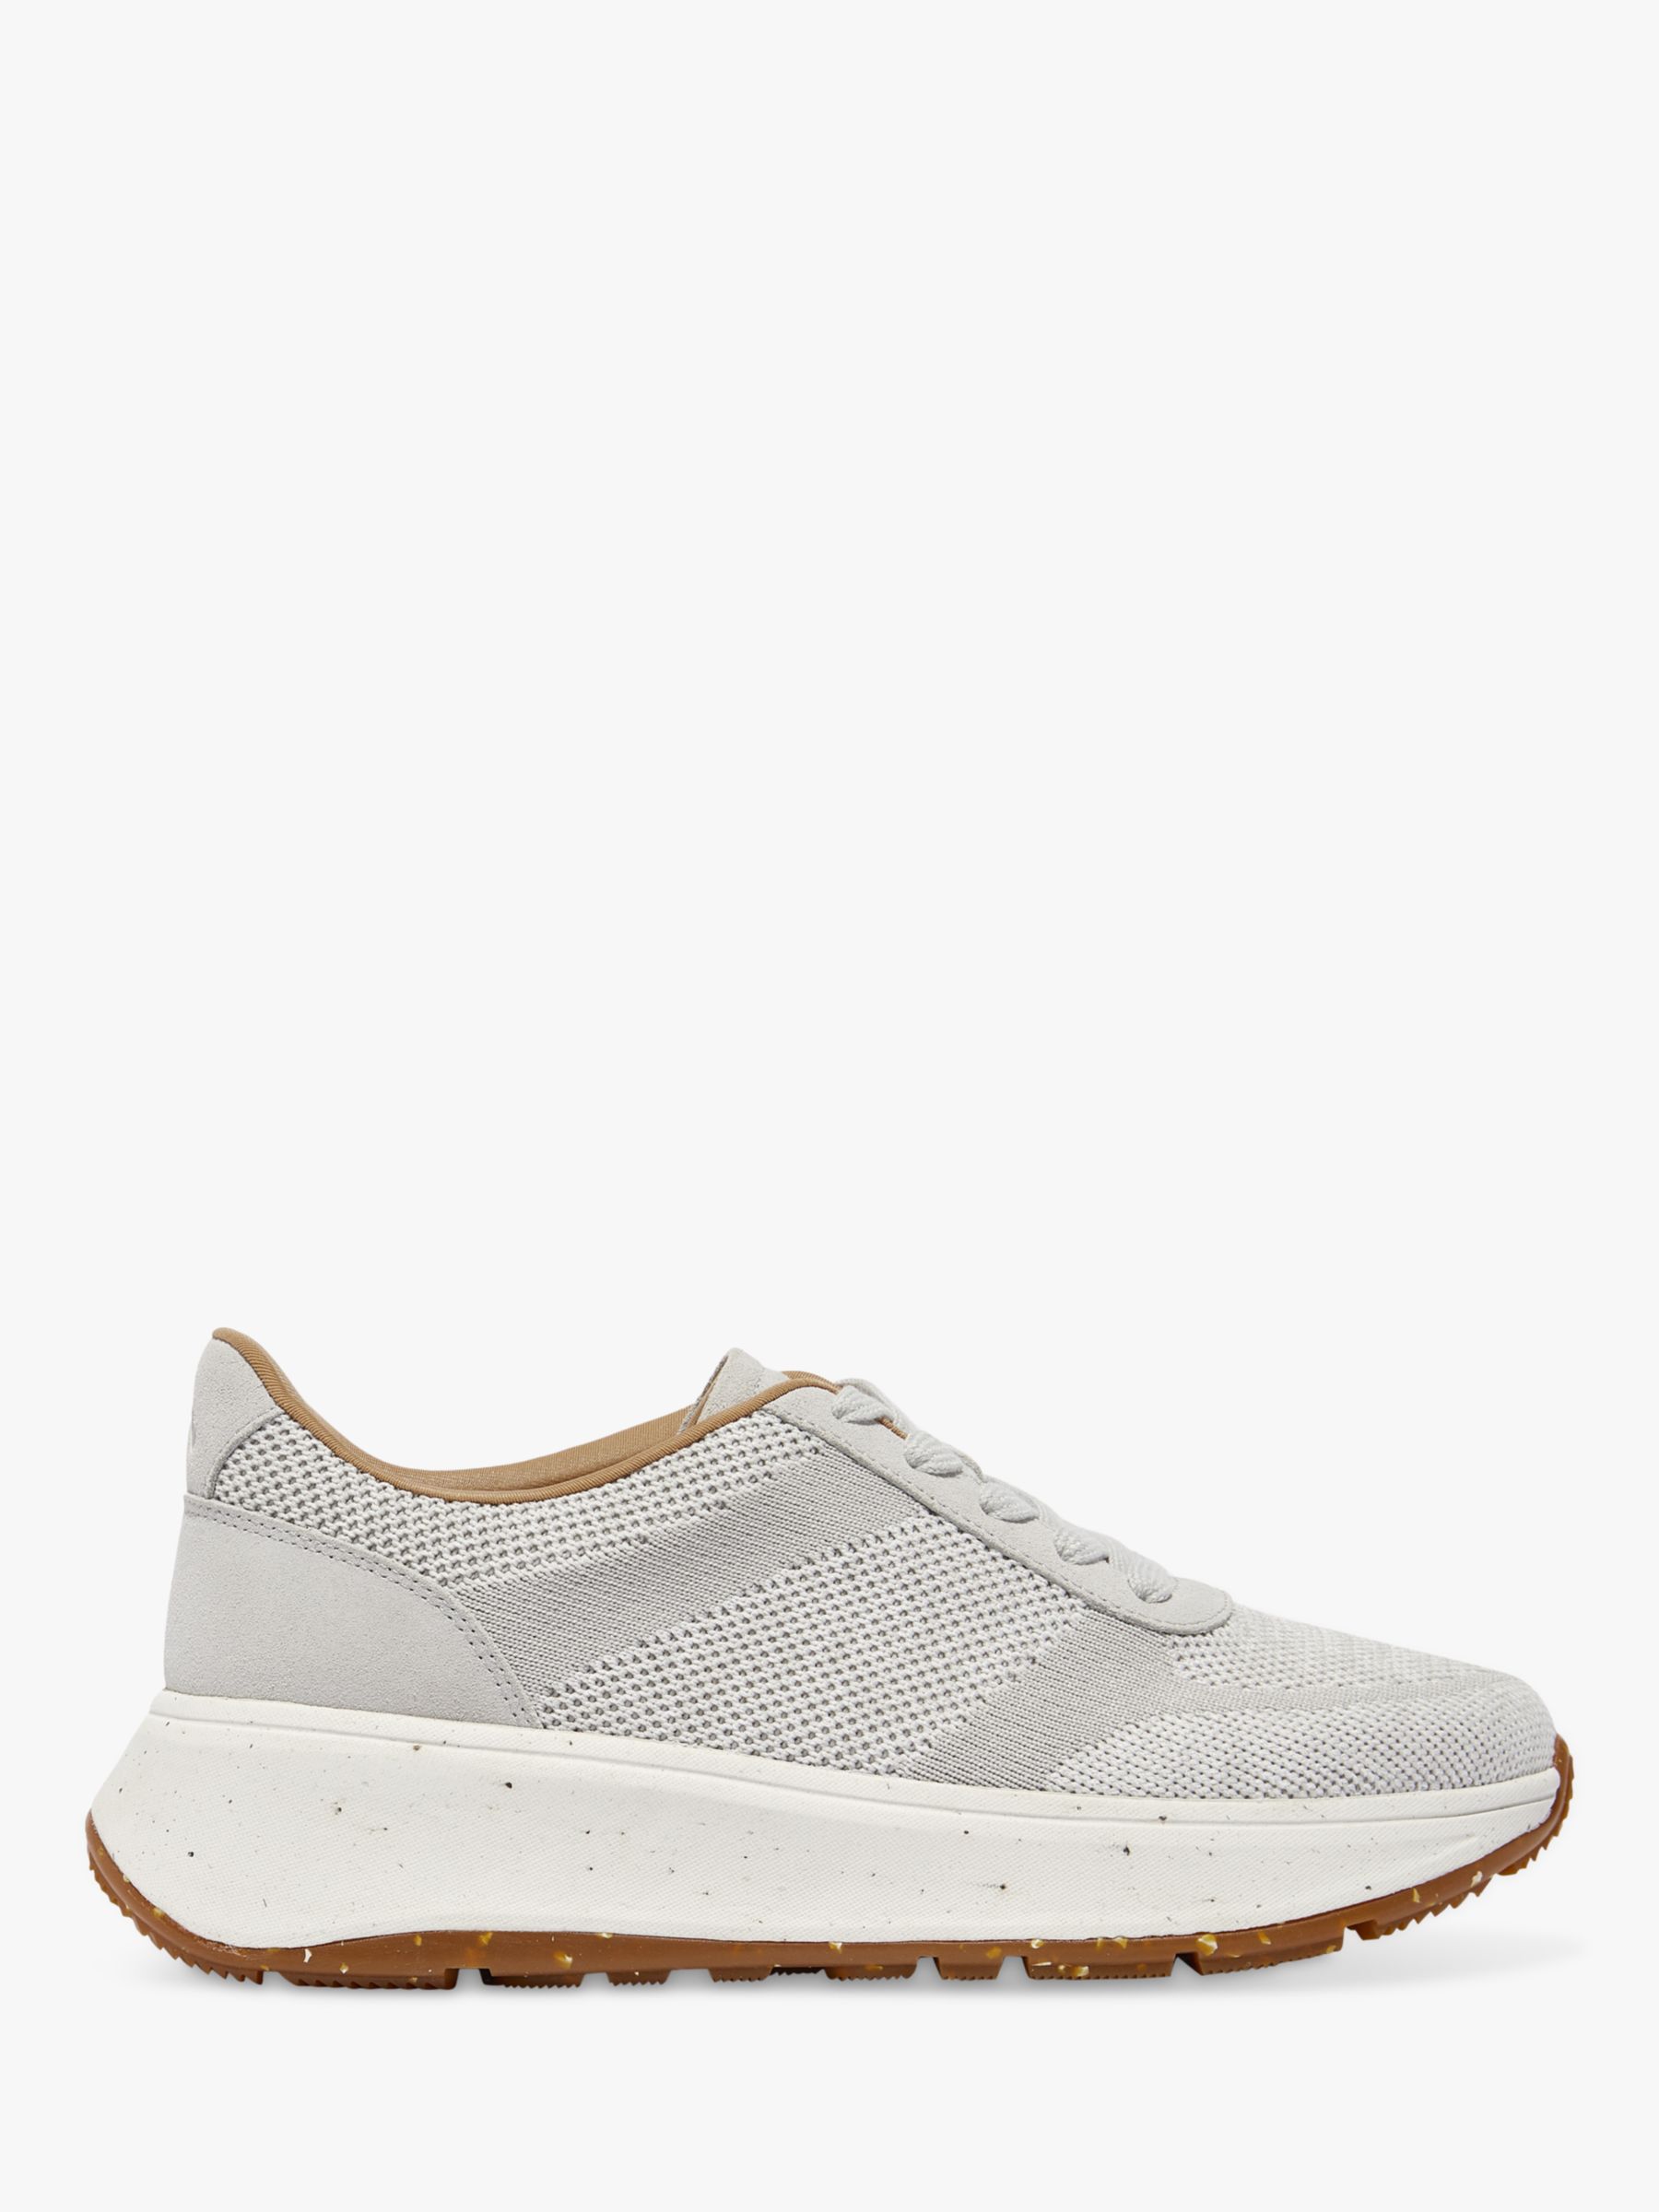 FitFlop F-Mode Knitted Trainers, Tiptoe Grey at John Lewis & Partners